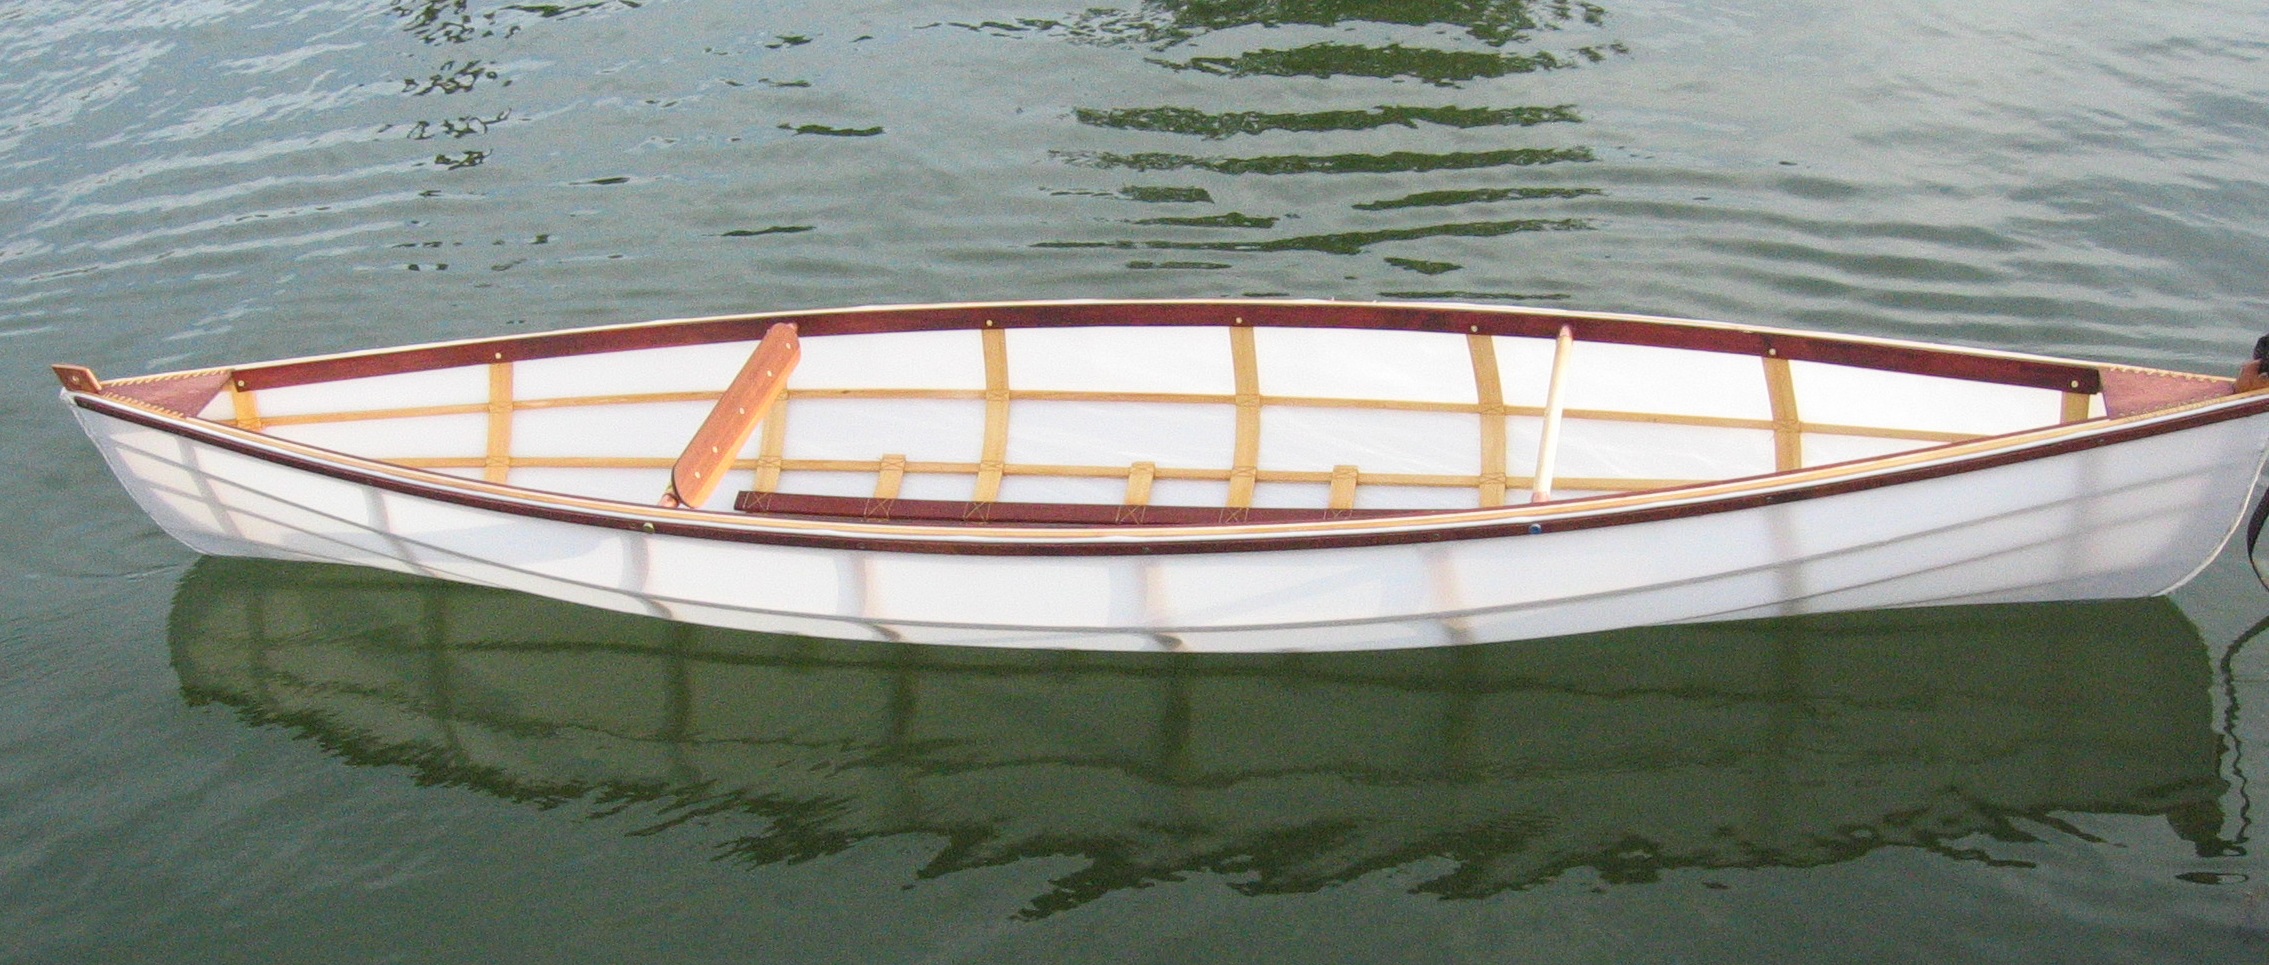  Boats | Dreamcatcher Boats - Lightweight Canoes, Kayaks and Rowboats